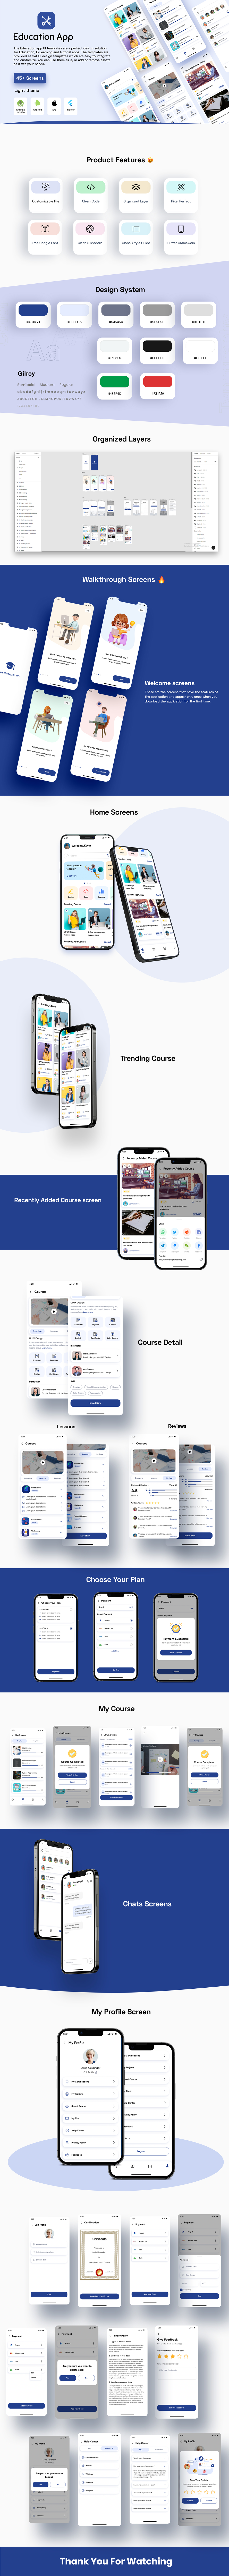 Entri - Education app | E-learning Management System Flutter 3.0(Android, iOS) app UI template - 6